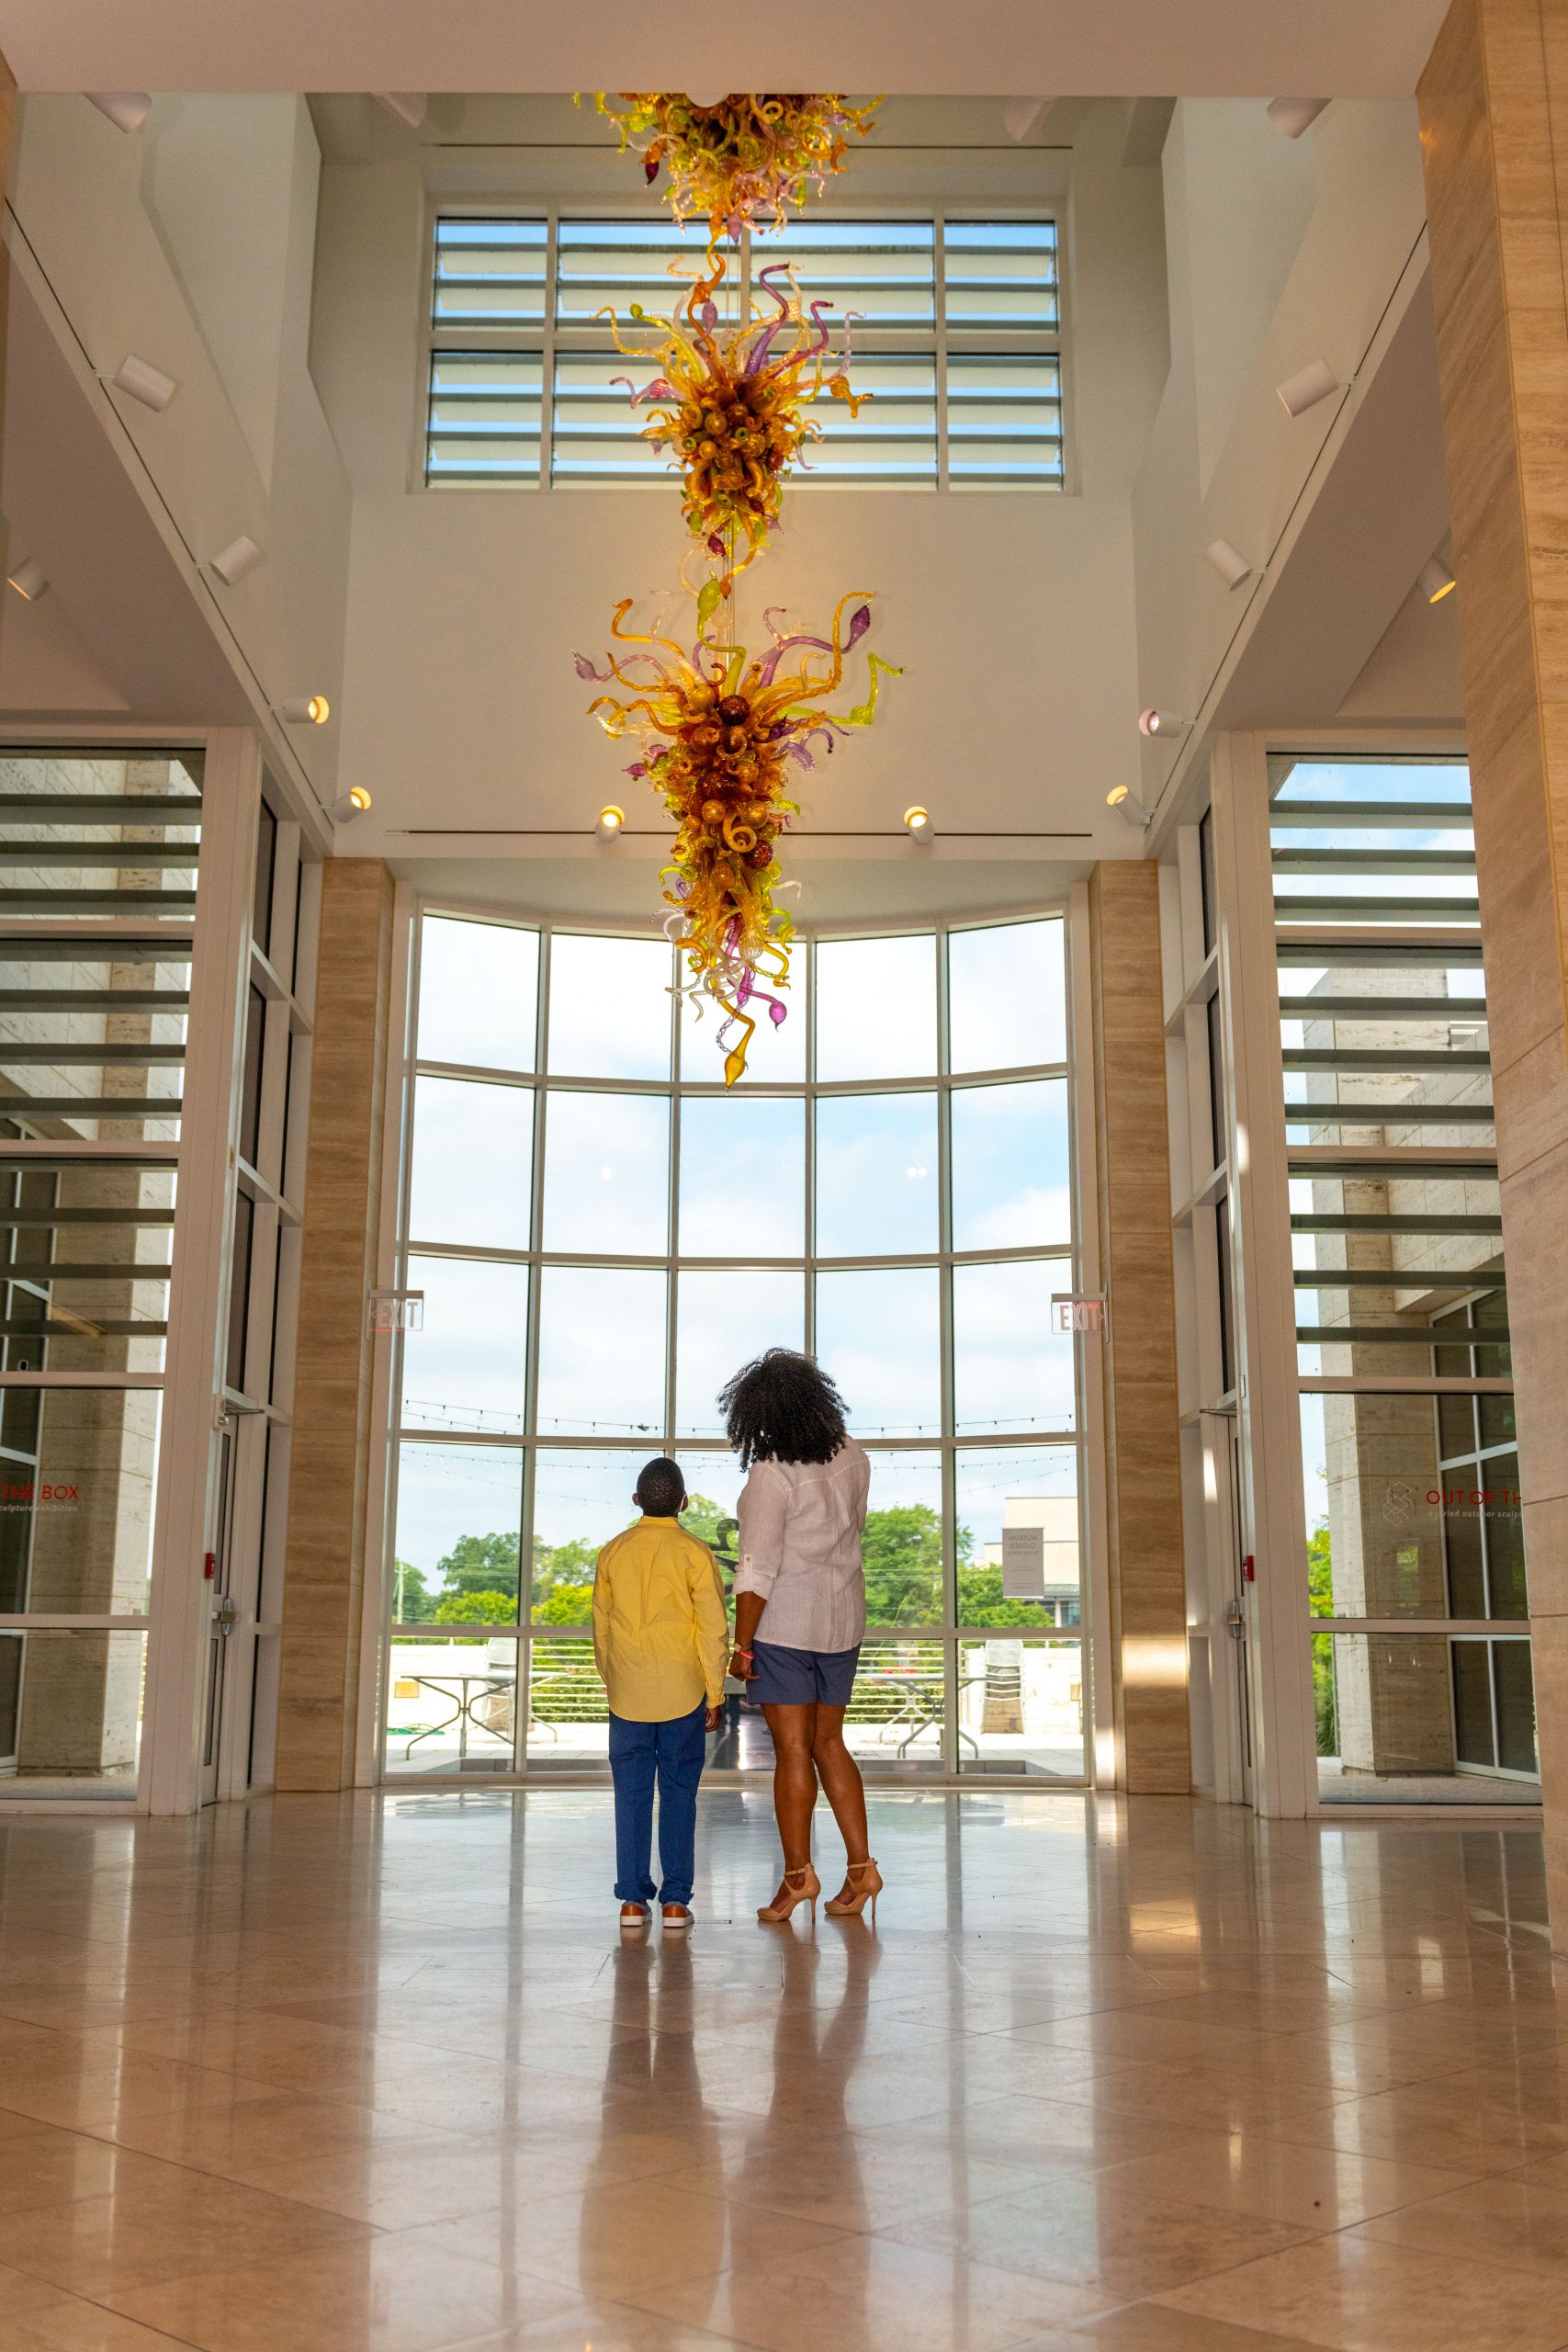 A woman and child look up at a glass sculpture that hangs from the ceiling.